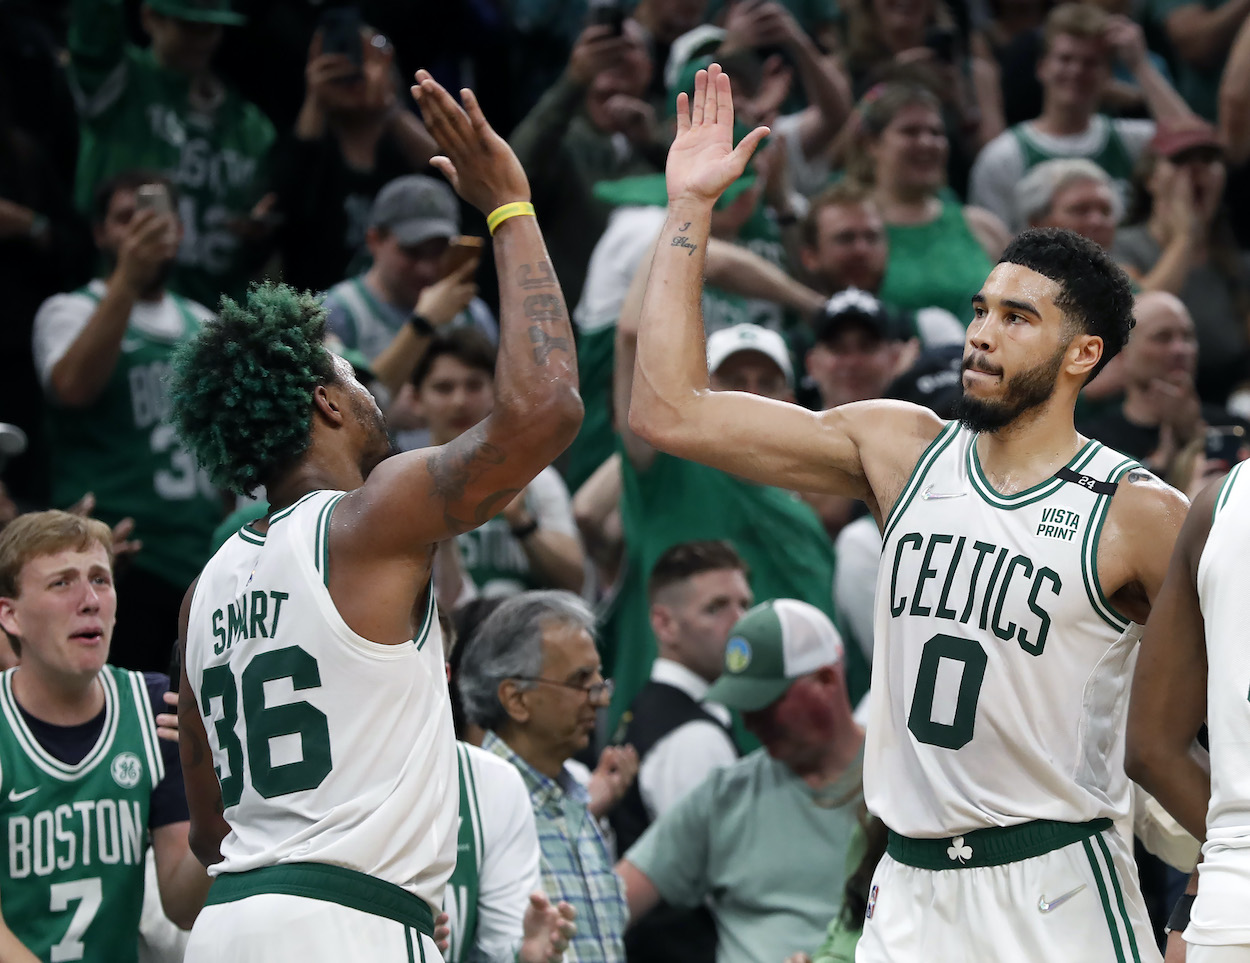 Boston Celtics Game 4 tickets are 'the hottest' in over a decade